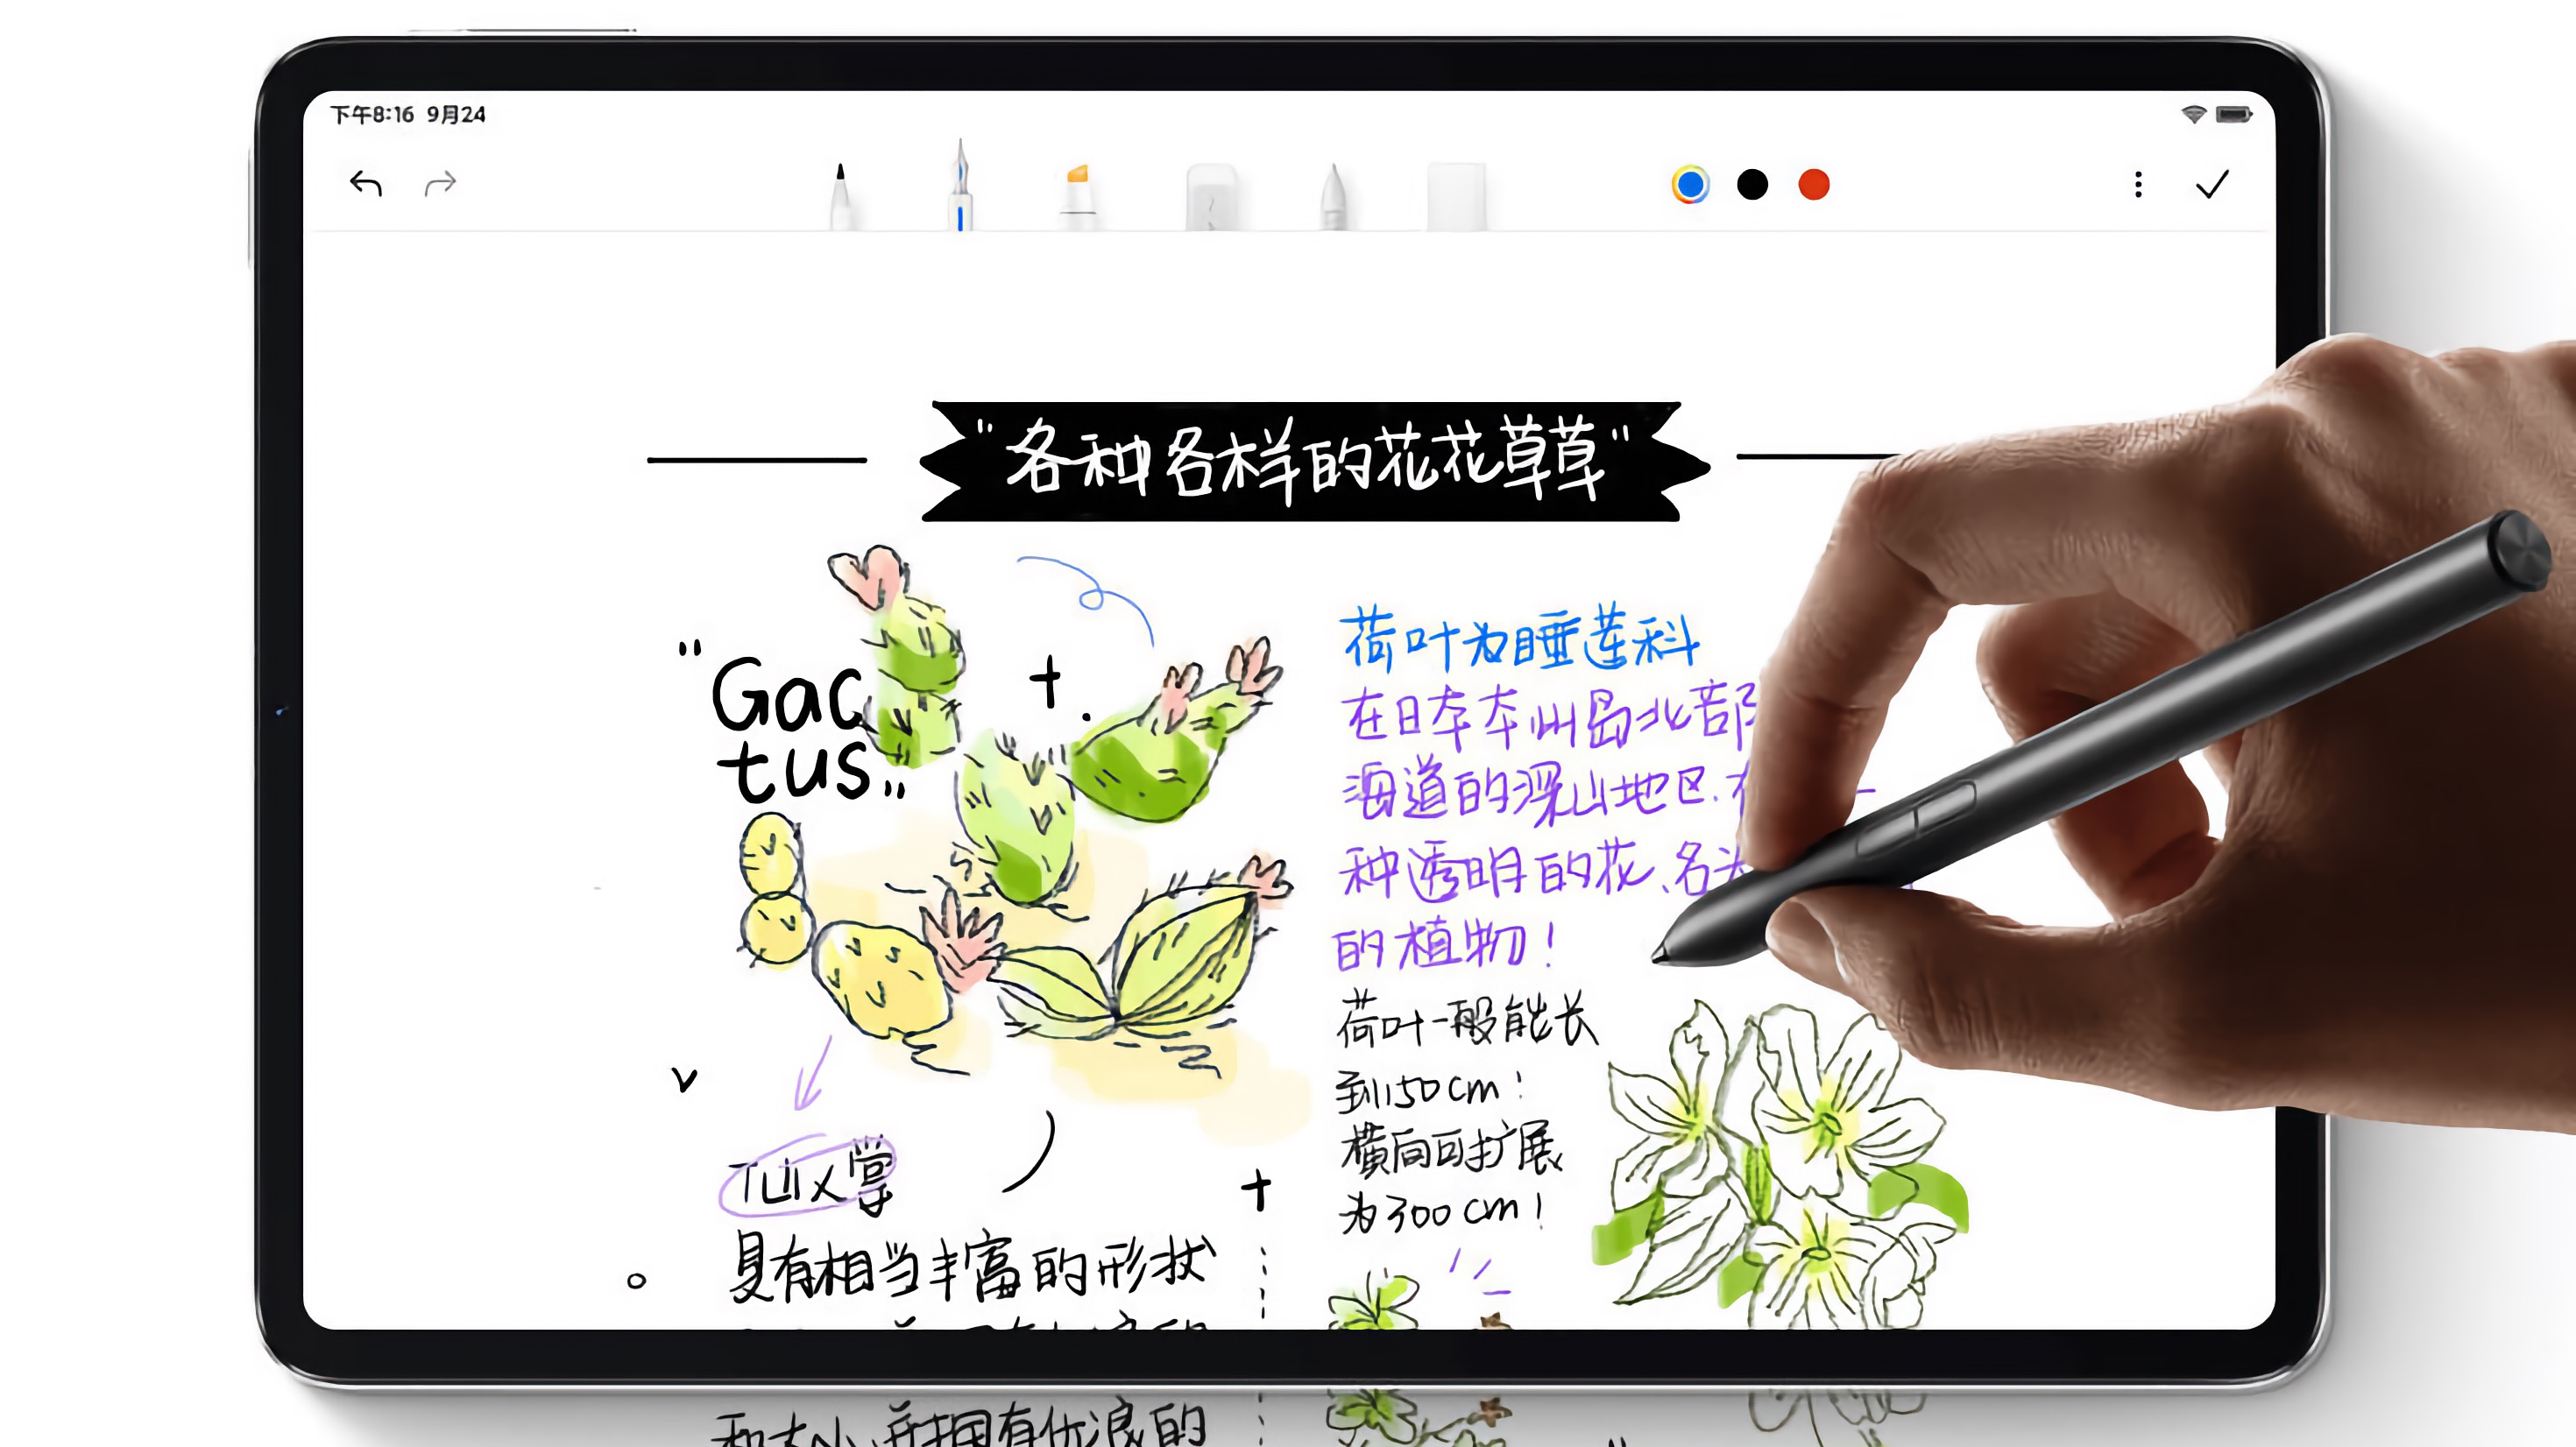 Xiaomi machine releases tablet knockoff that literally has iPad Pro in the name - 9to5Mac